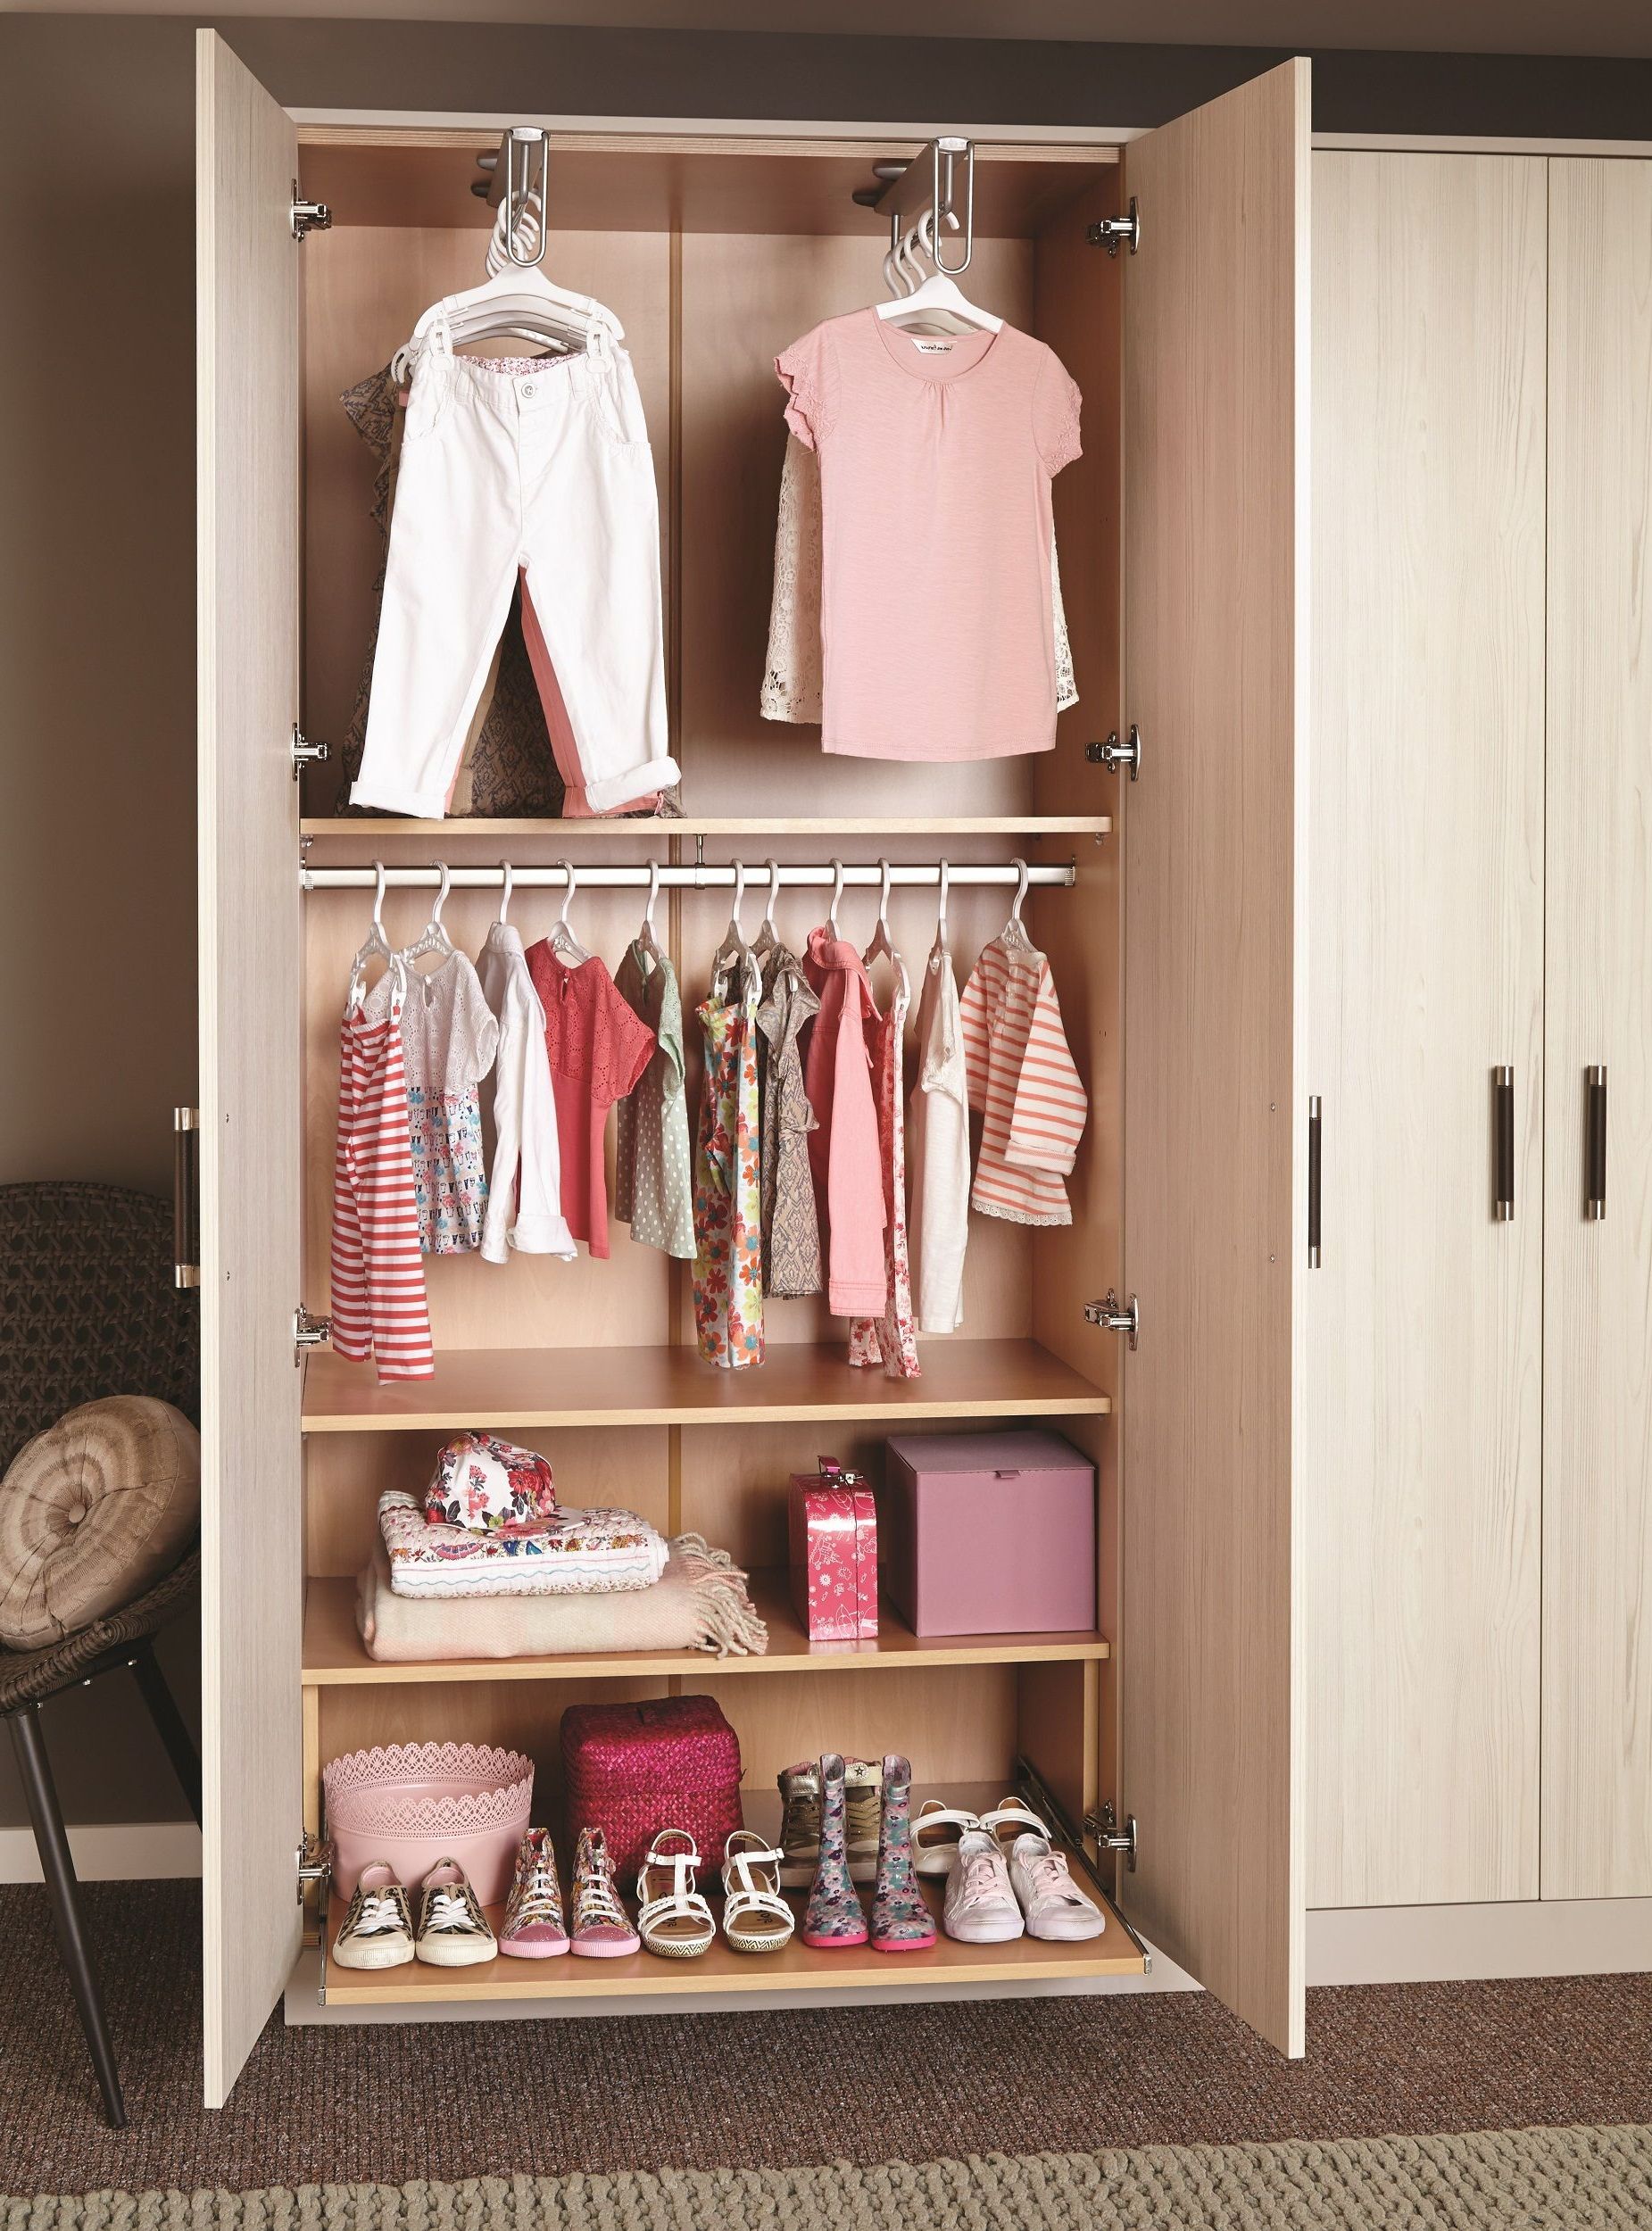 Pinterest For Double Hanging Rail Wardrobes (View 5 of 20)